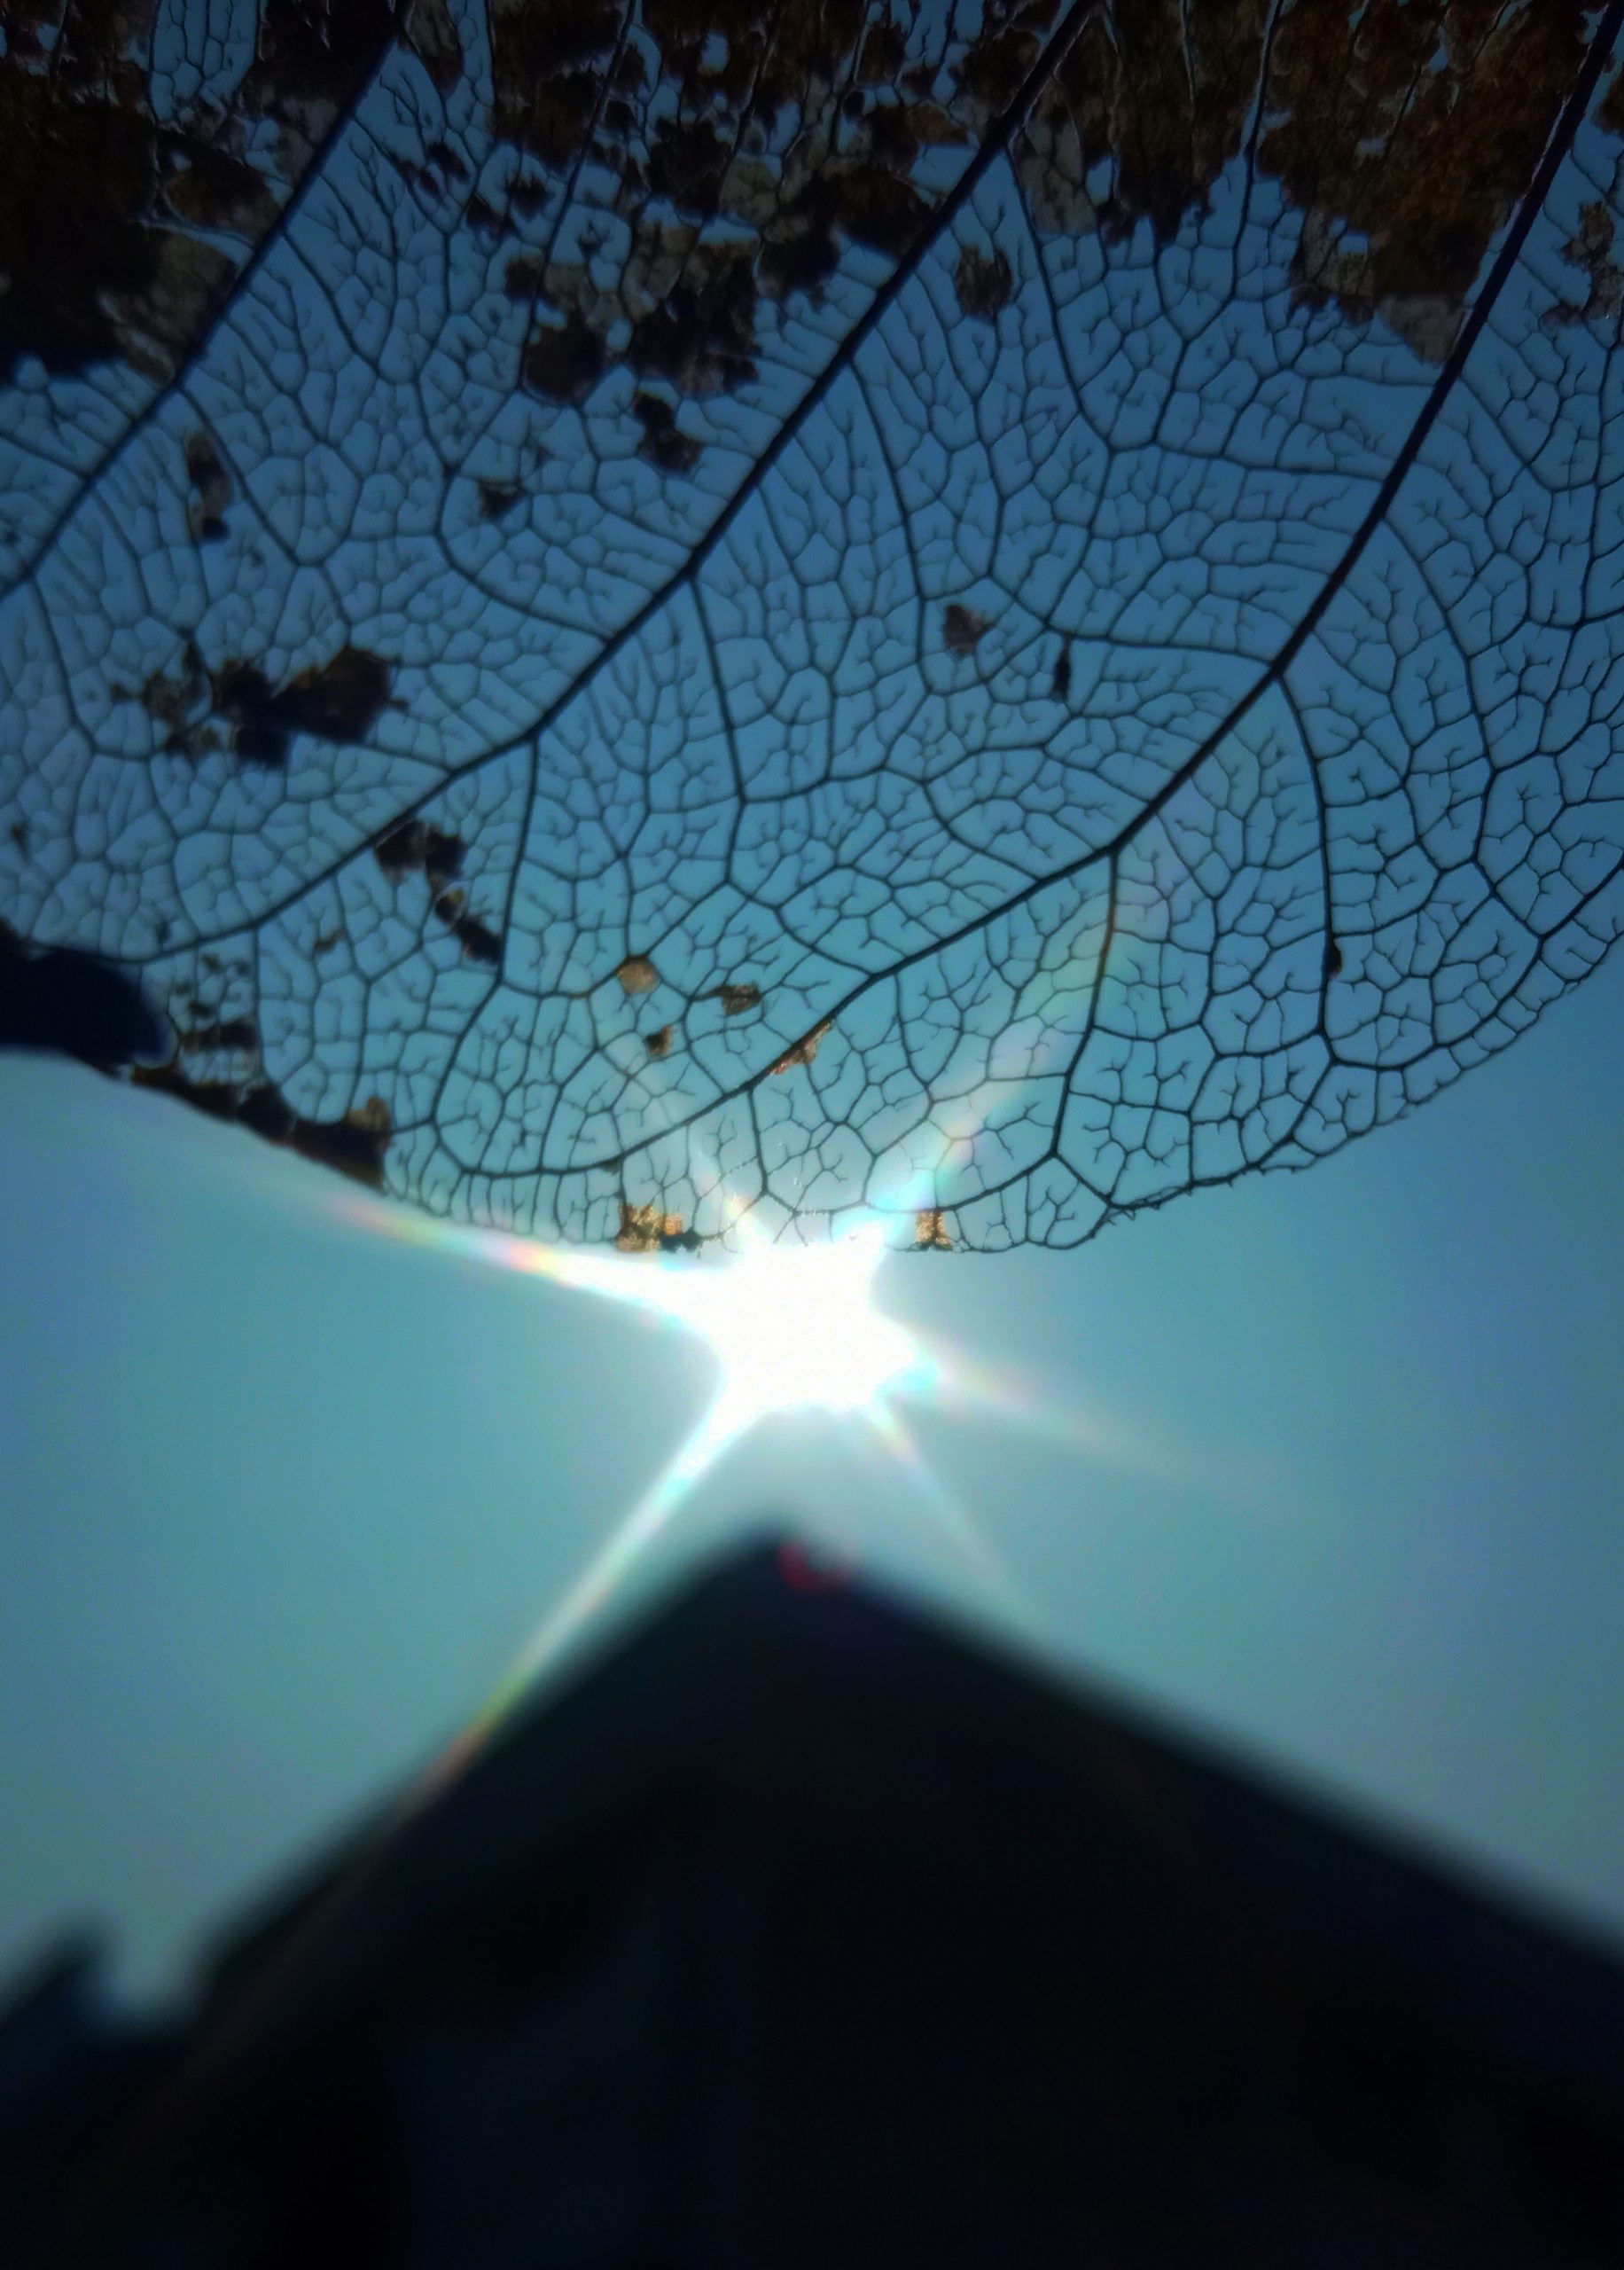 A dead leaf and sunrays